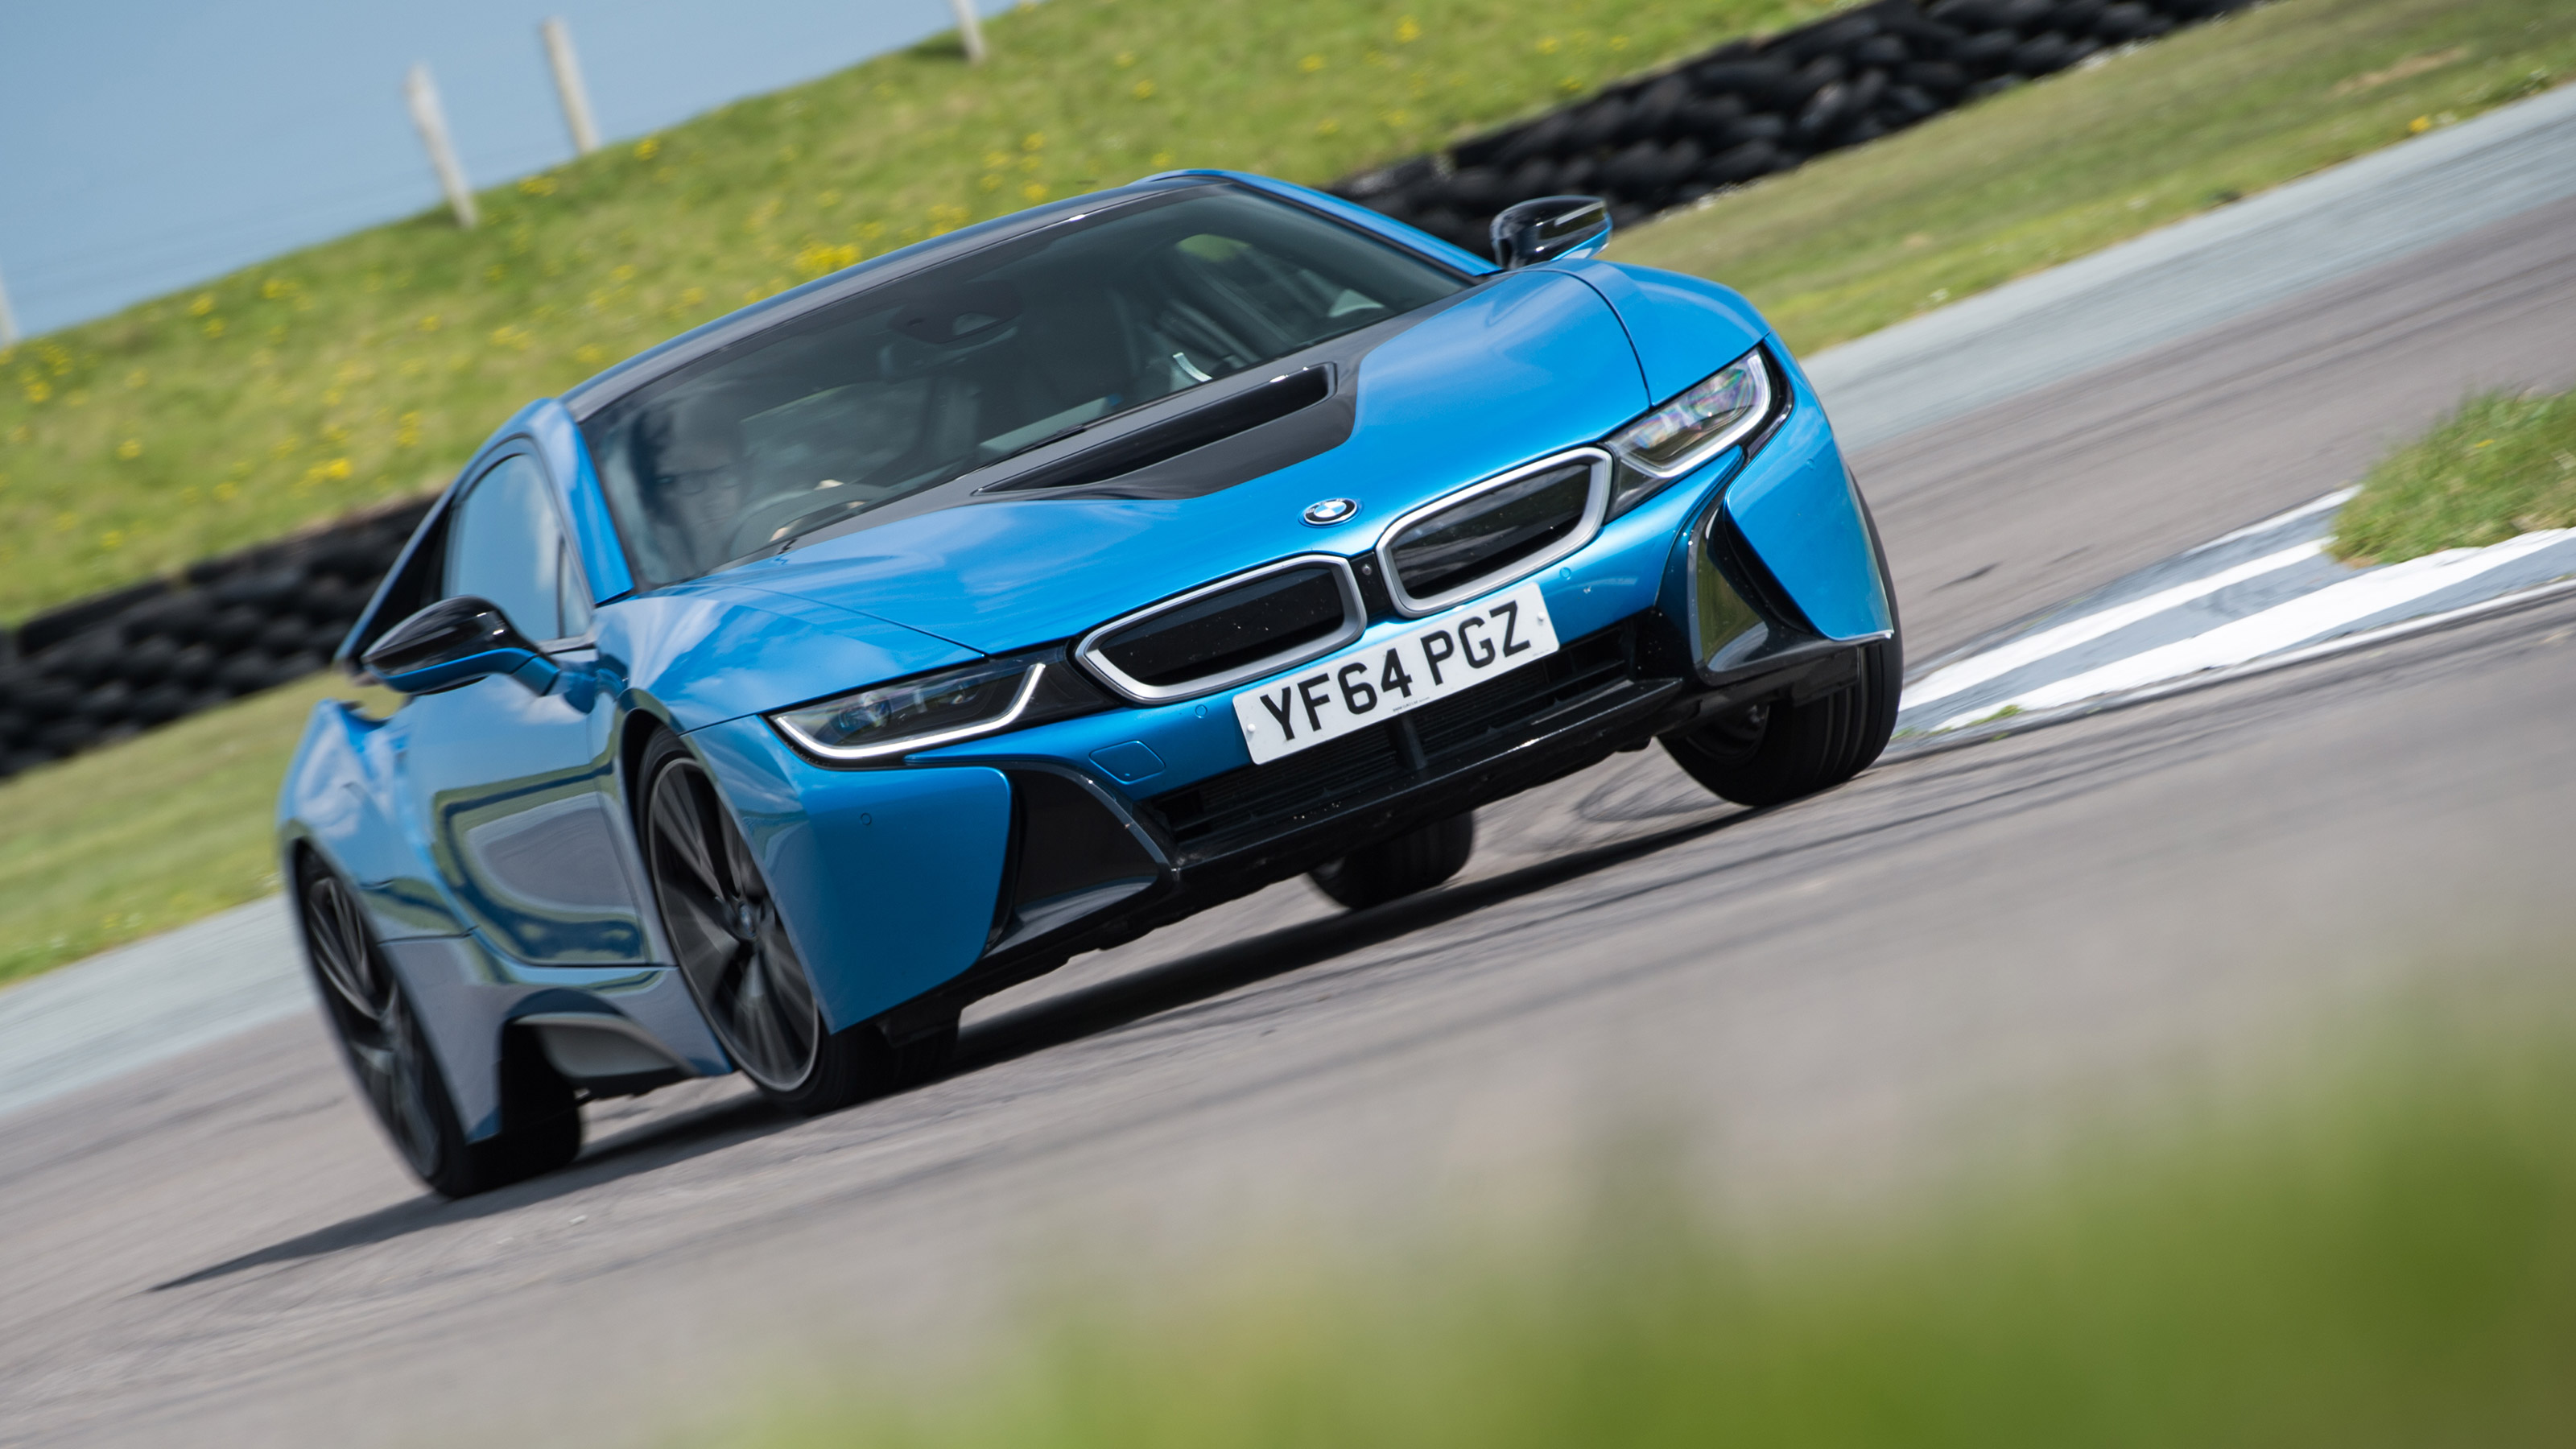 2015 BMW i8: Sexy Plug-In Hybrid Sport Coupe Coming Later This Year